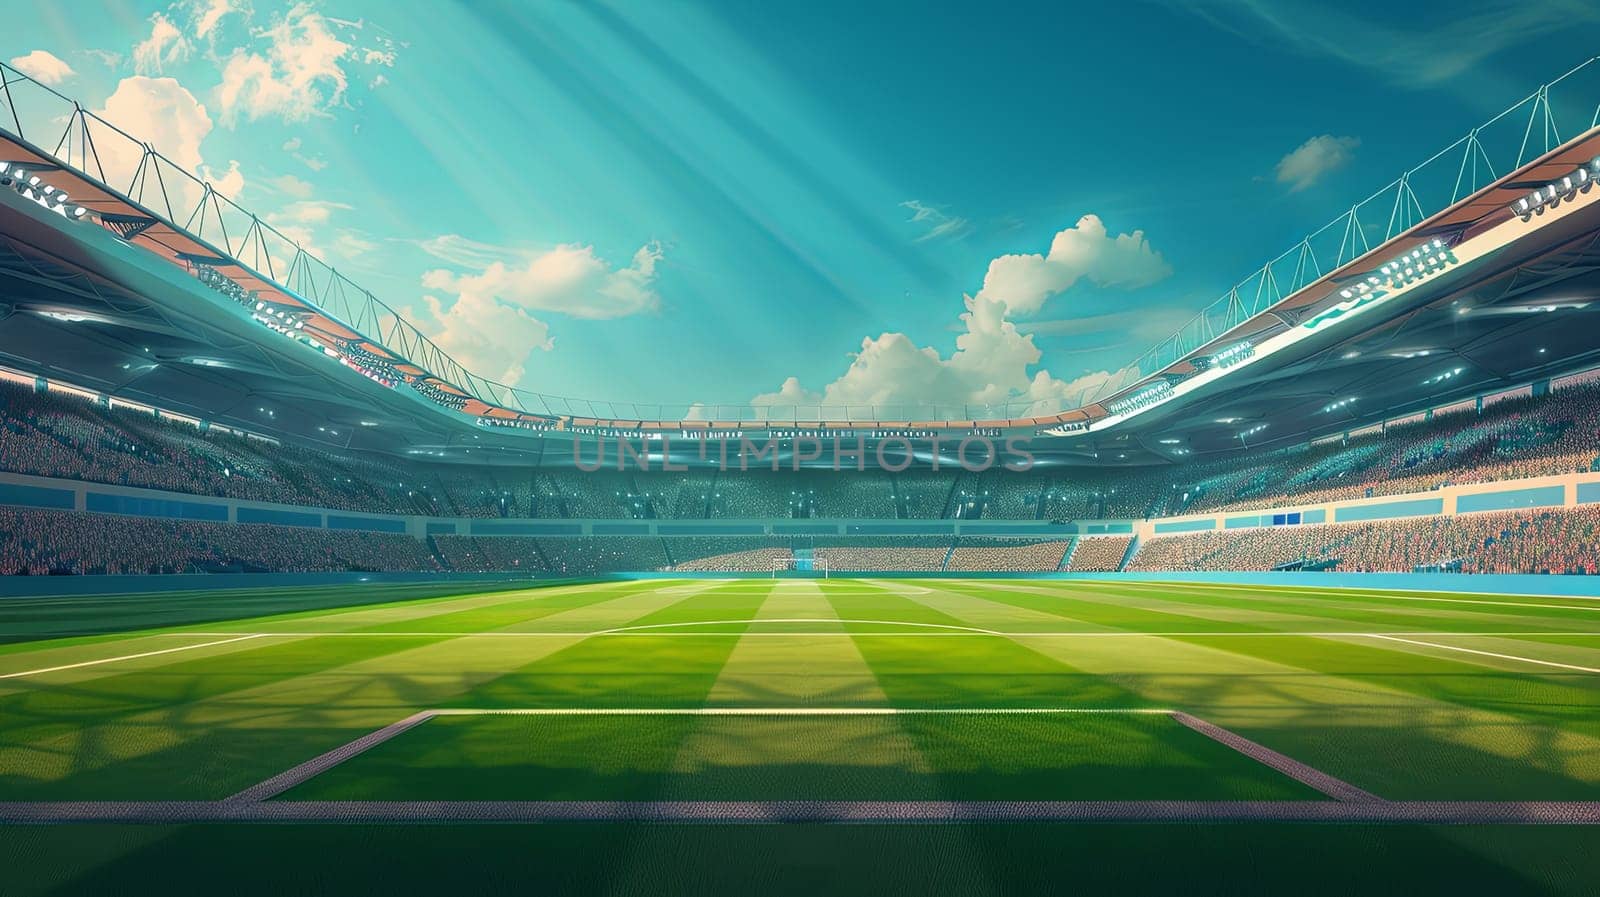 A large stadium with a lush green field and clear blue sky, showcasing the perfect setting for football matches with excited fans in the stands.